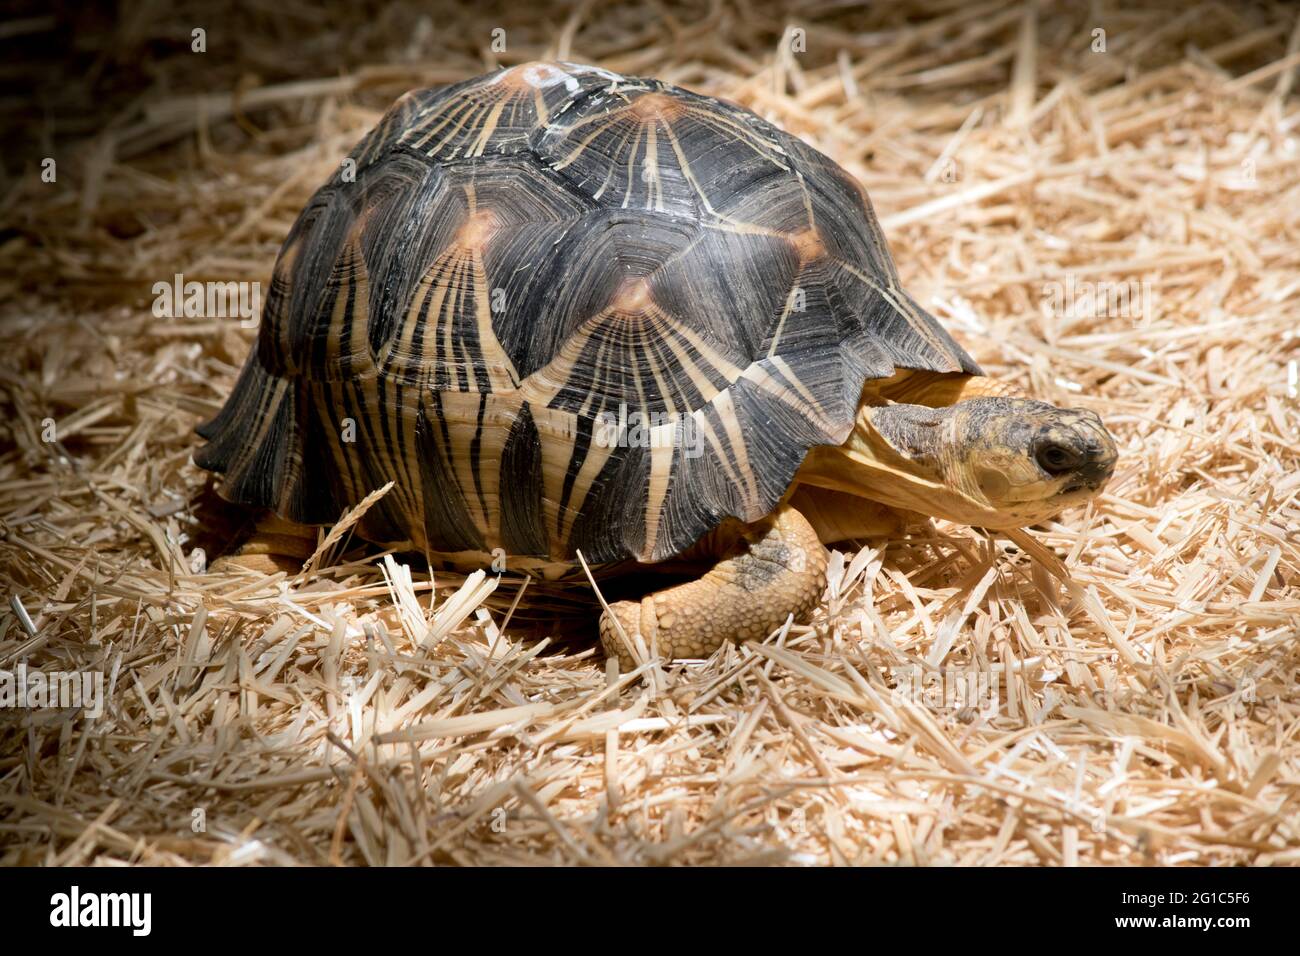 this is a side view of a radiate tortoise Stock Photo